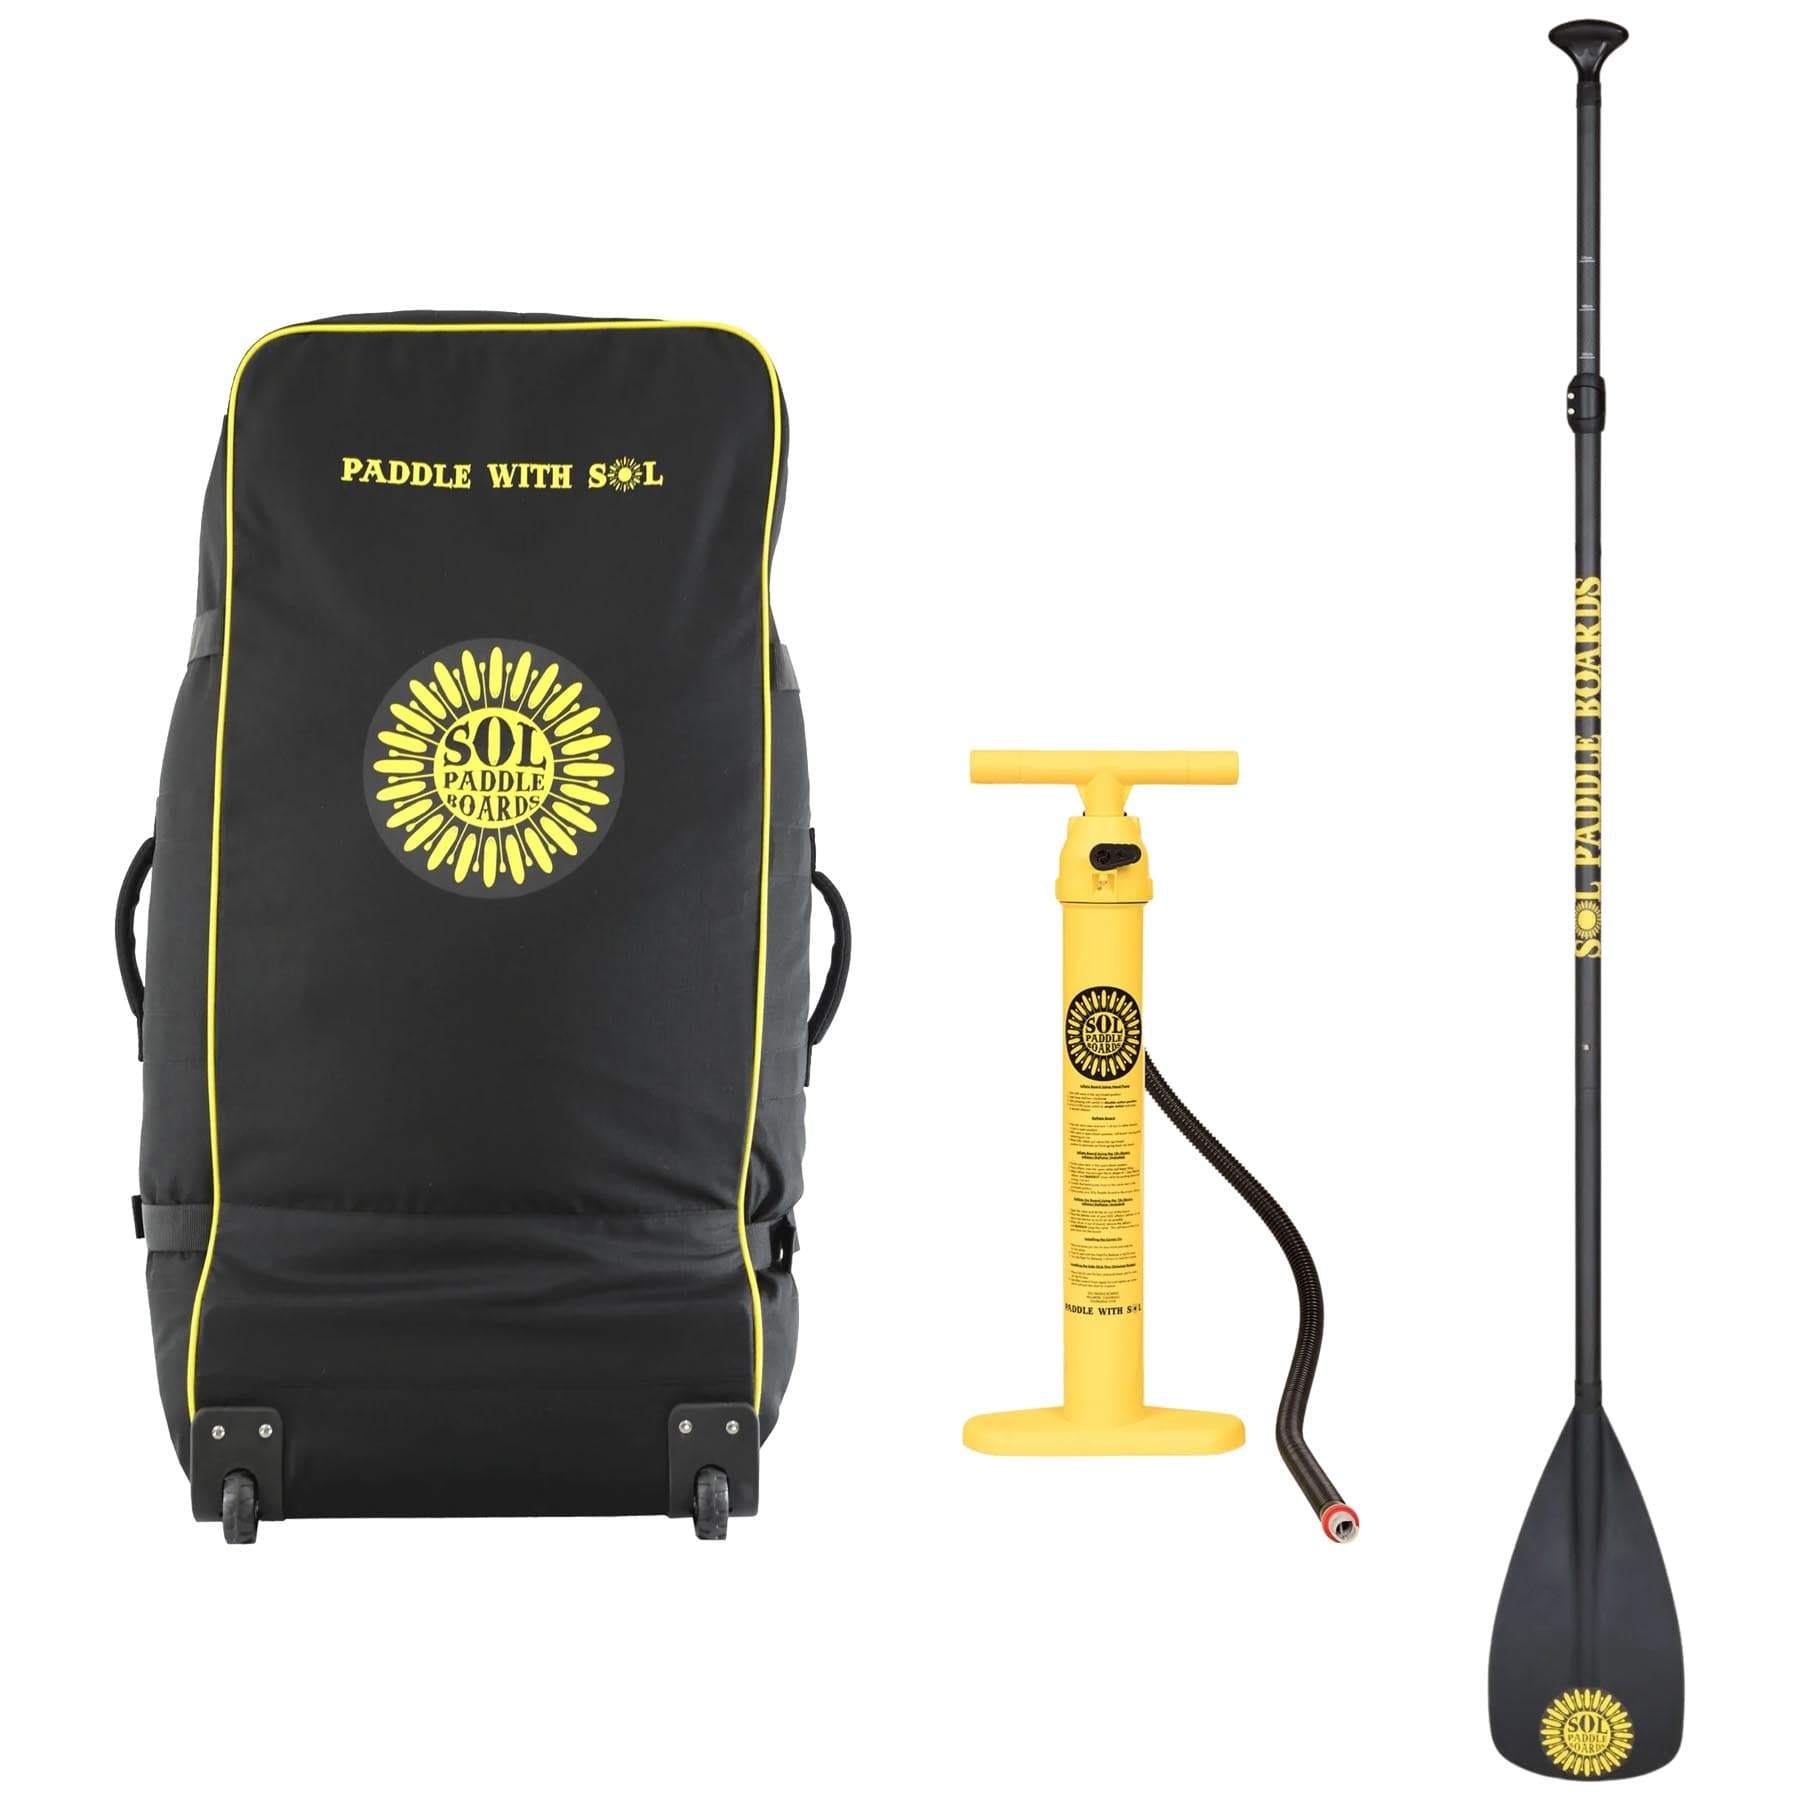 Black SOLsumo inflatable SUP backpack with SOL logo, accompanied by a paddle and air pump on a white background.